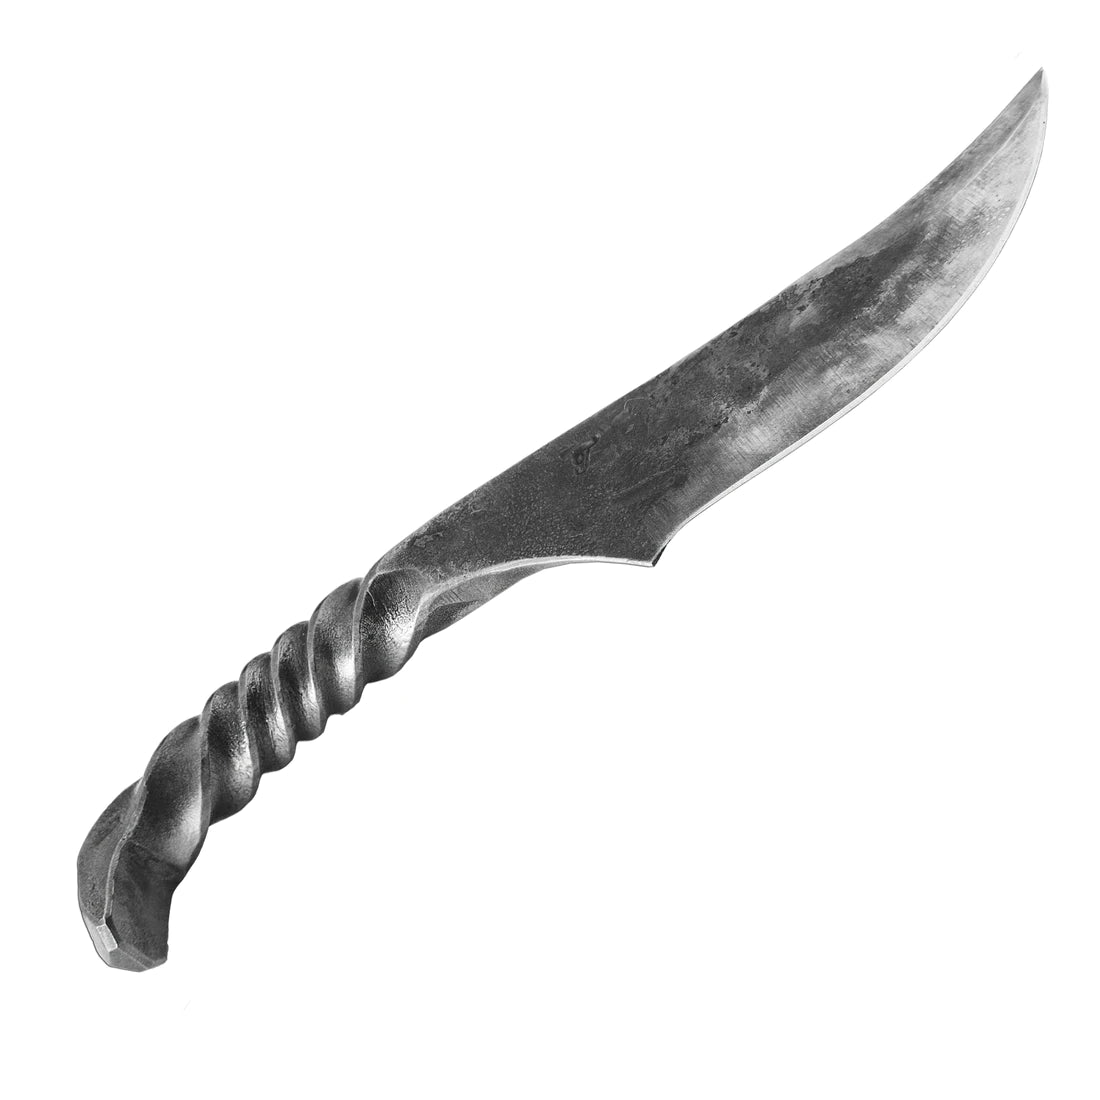 Forged Celtic Wolfclaw knife with scabbard